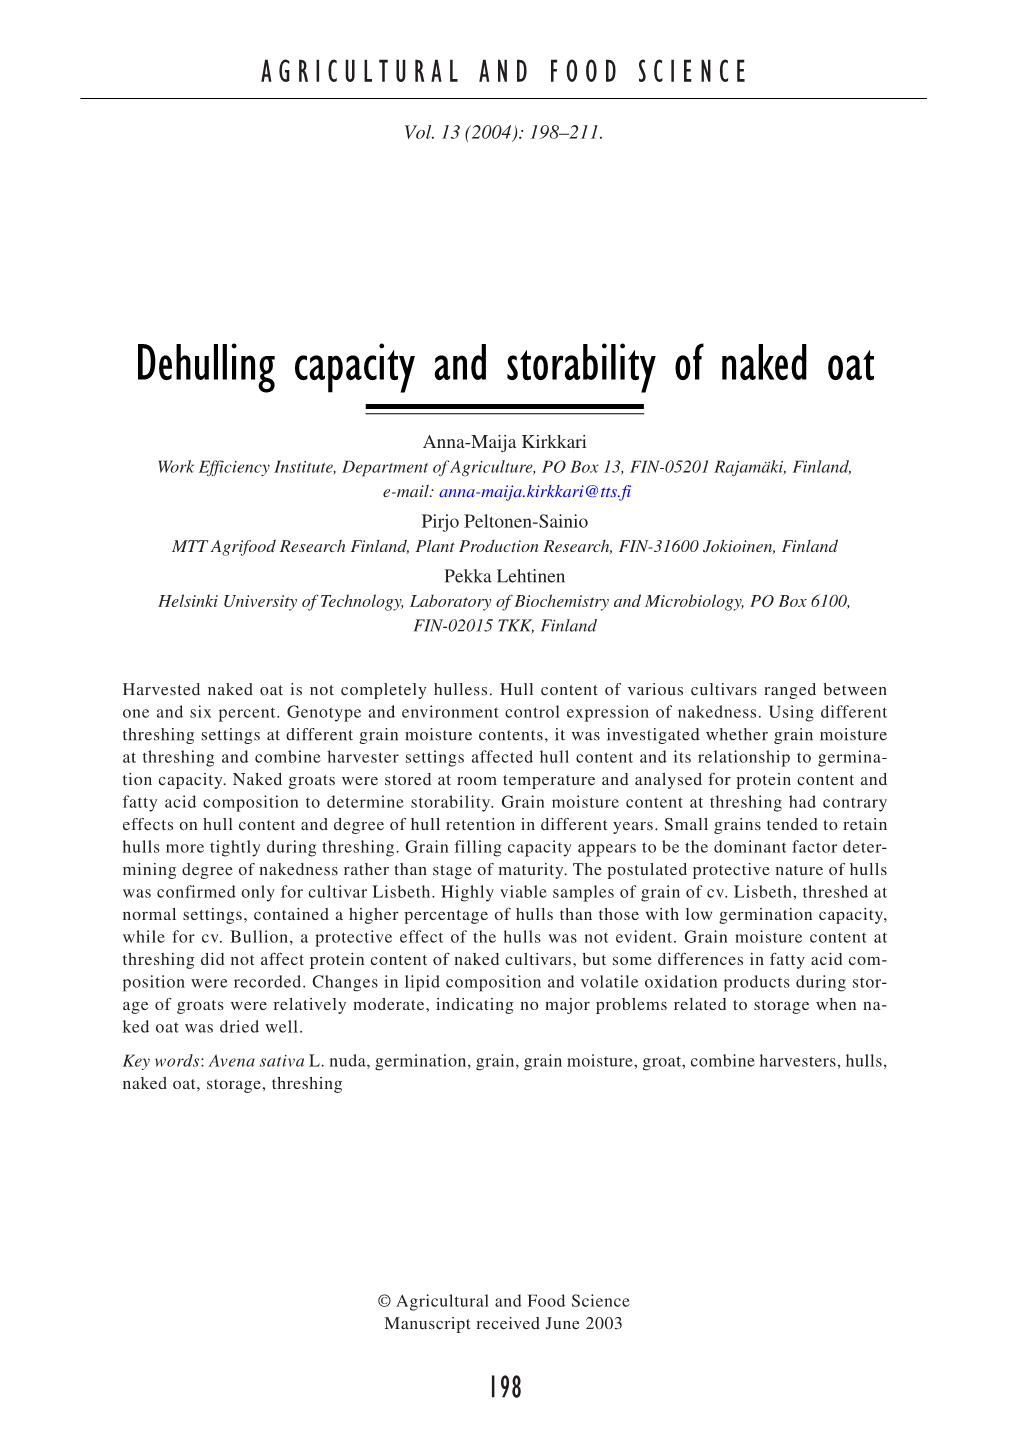 Dehulling Capacity and Storability of Naked Oat